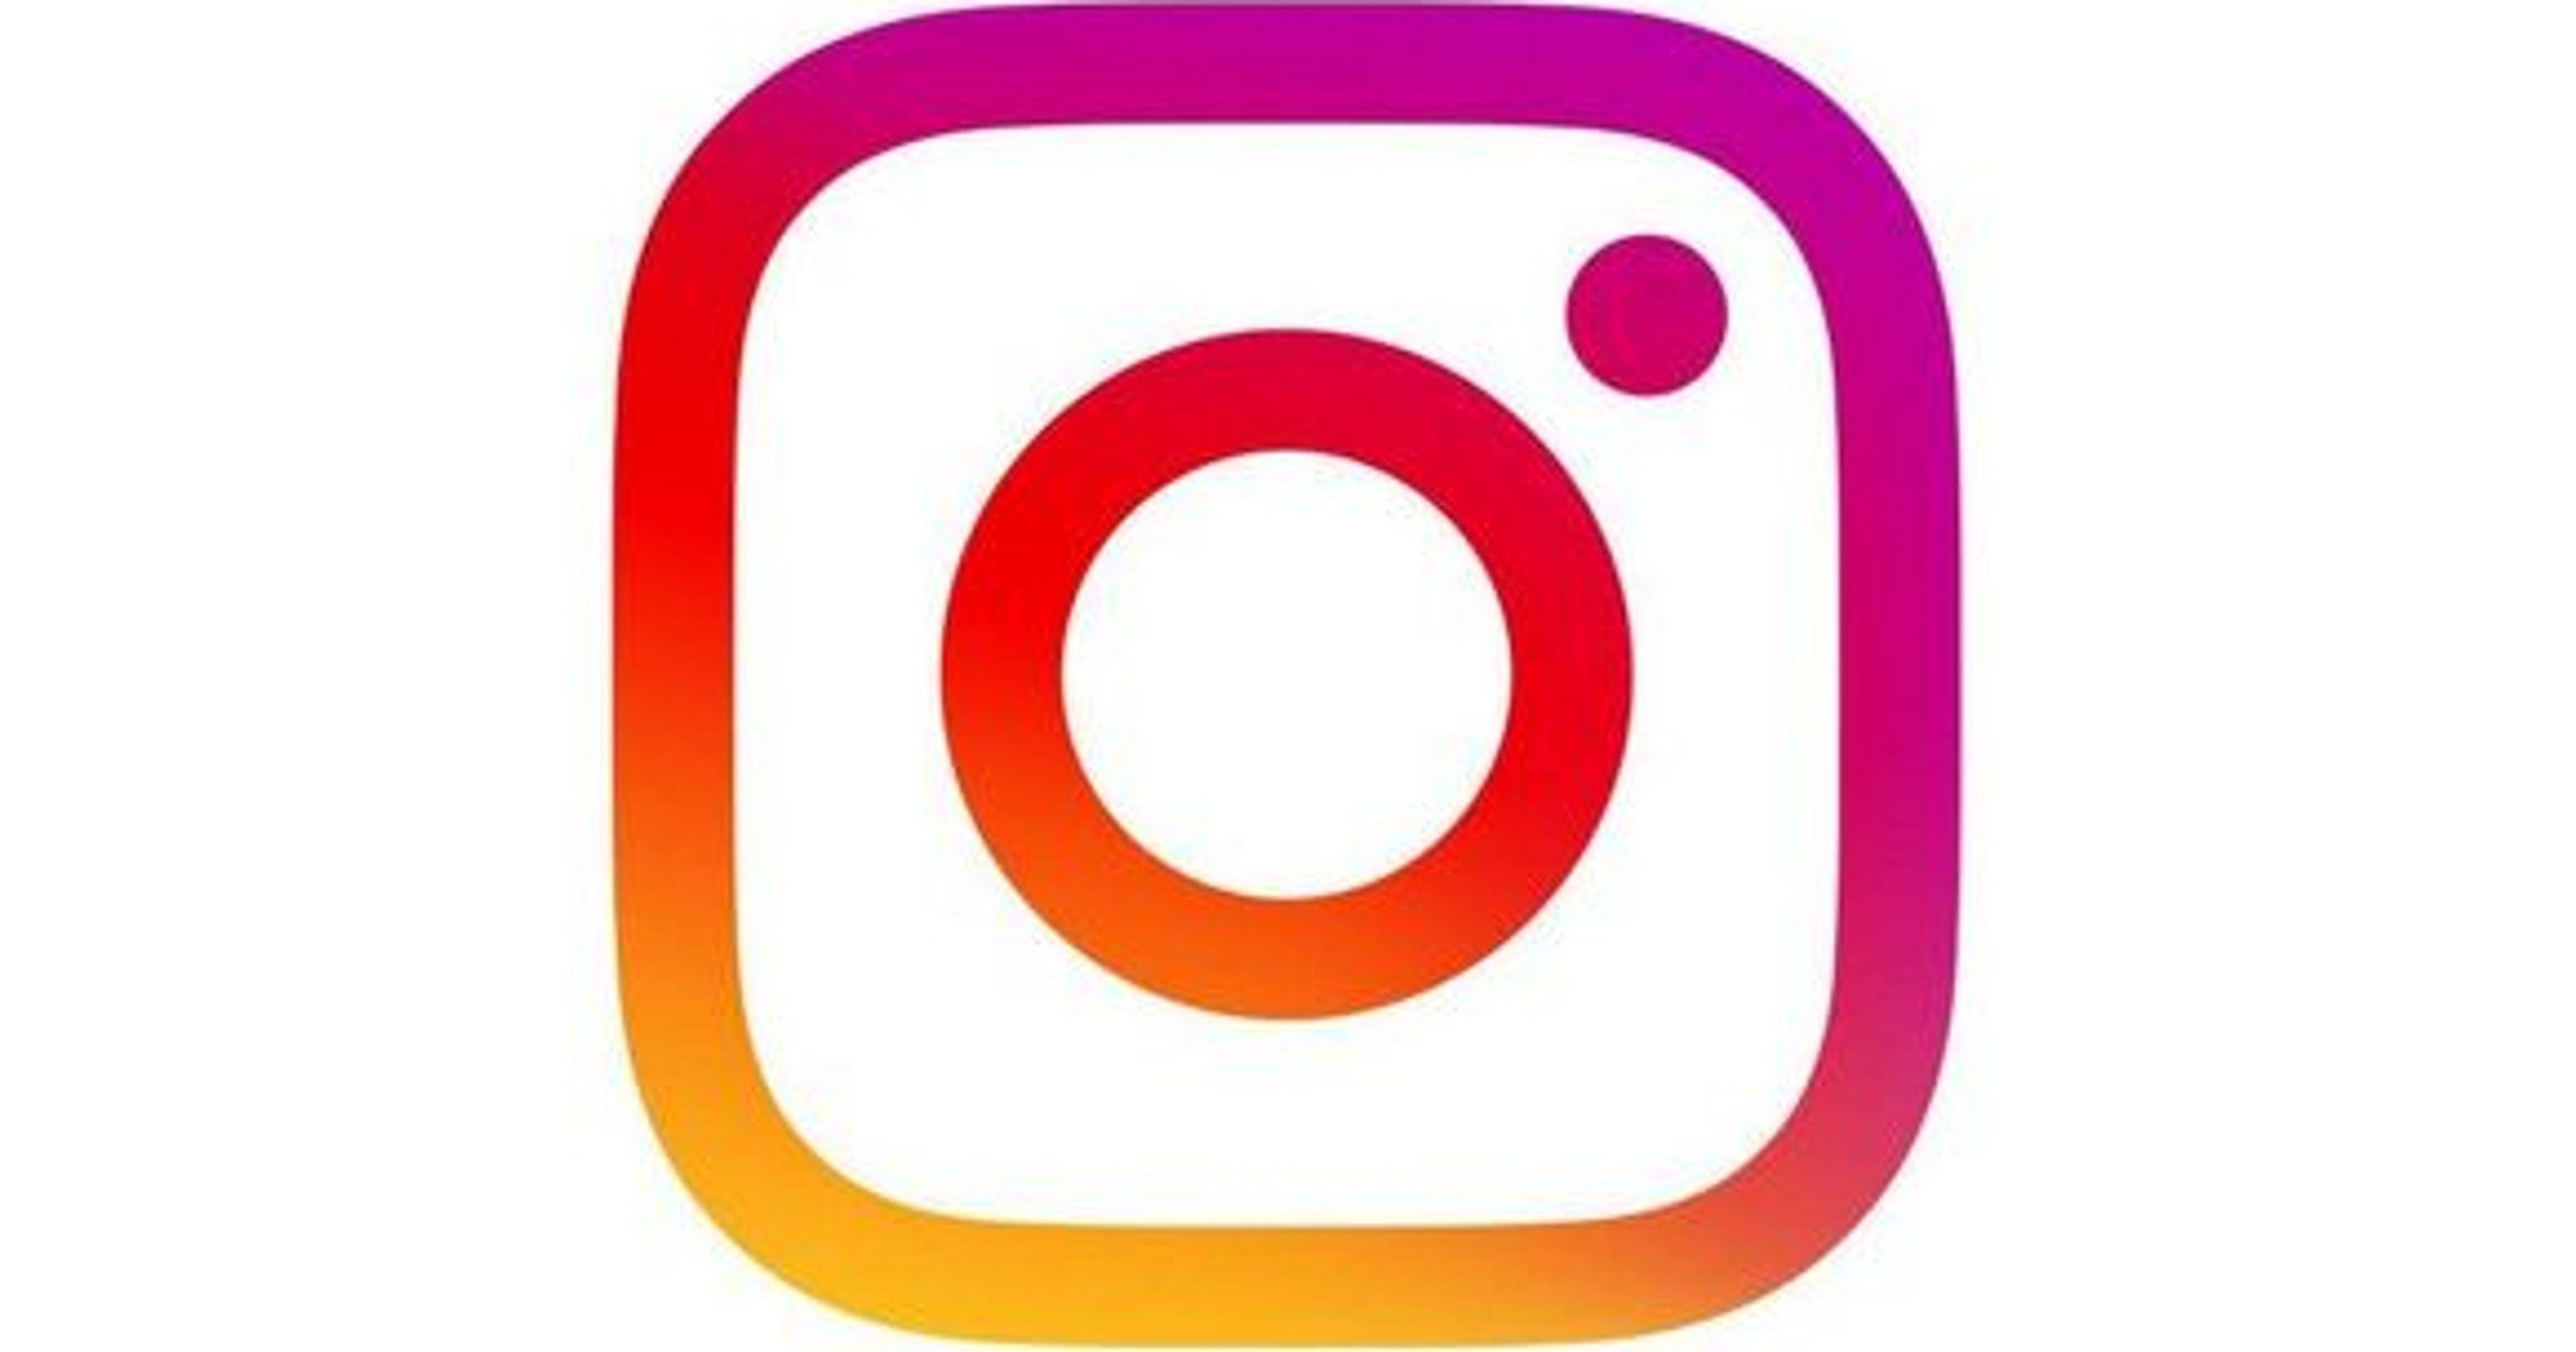 Large Instagram Logo - Instagram Lite launches on Google Play, takes up less space on phones